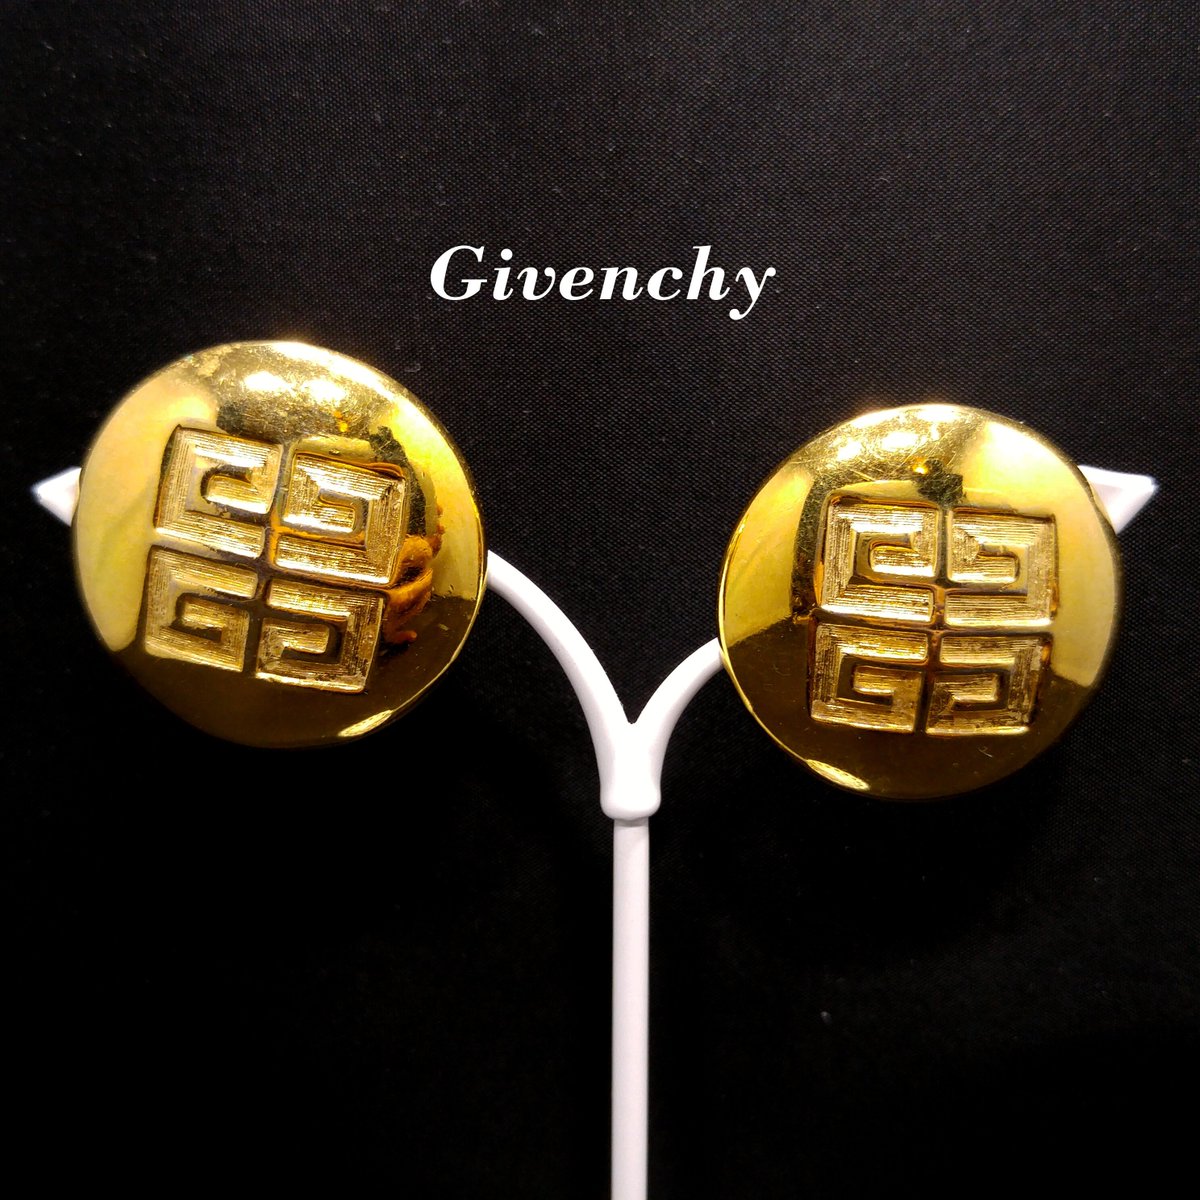 #etsy shop: Givenchy Hallmark Round Clip Earrings, Large Gold Plated, 1980s Vintage Jewelry etsy.me/3NB4RXp #gold #circle #women #givenchyparisny #givenchyearrings #vintageearrings #vintagejewelry #largeearrings #vintagegift